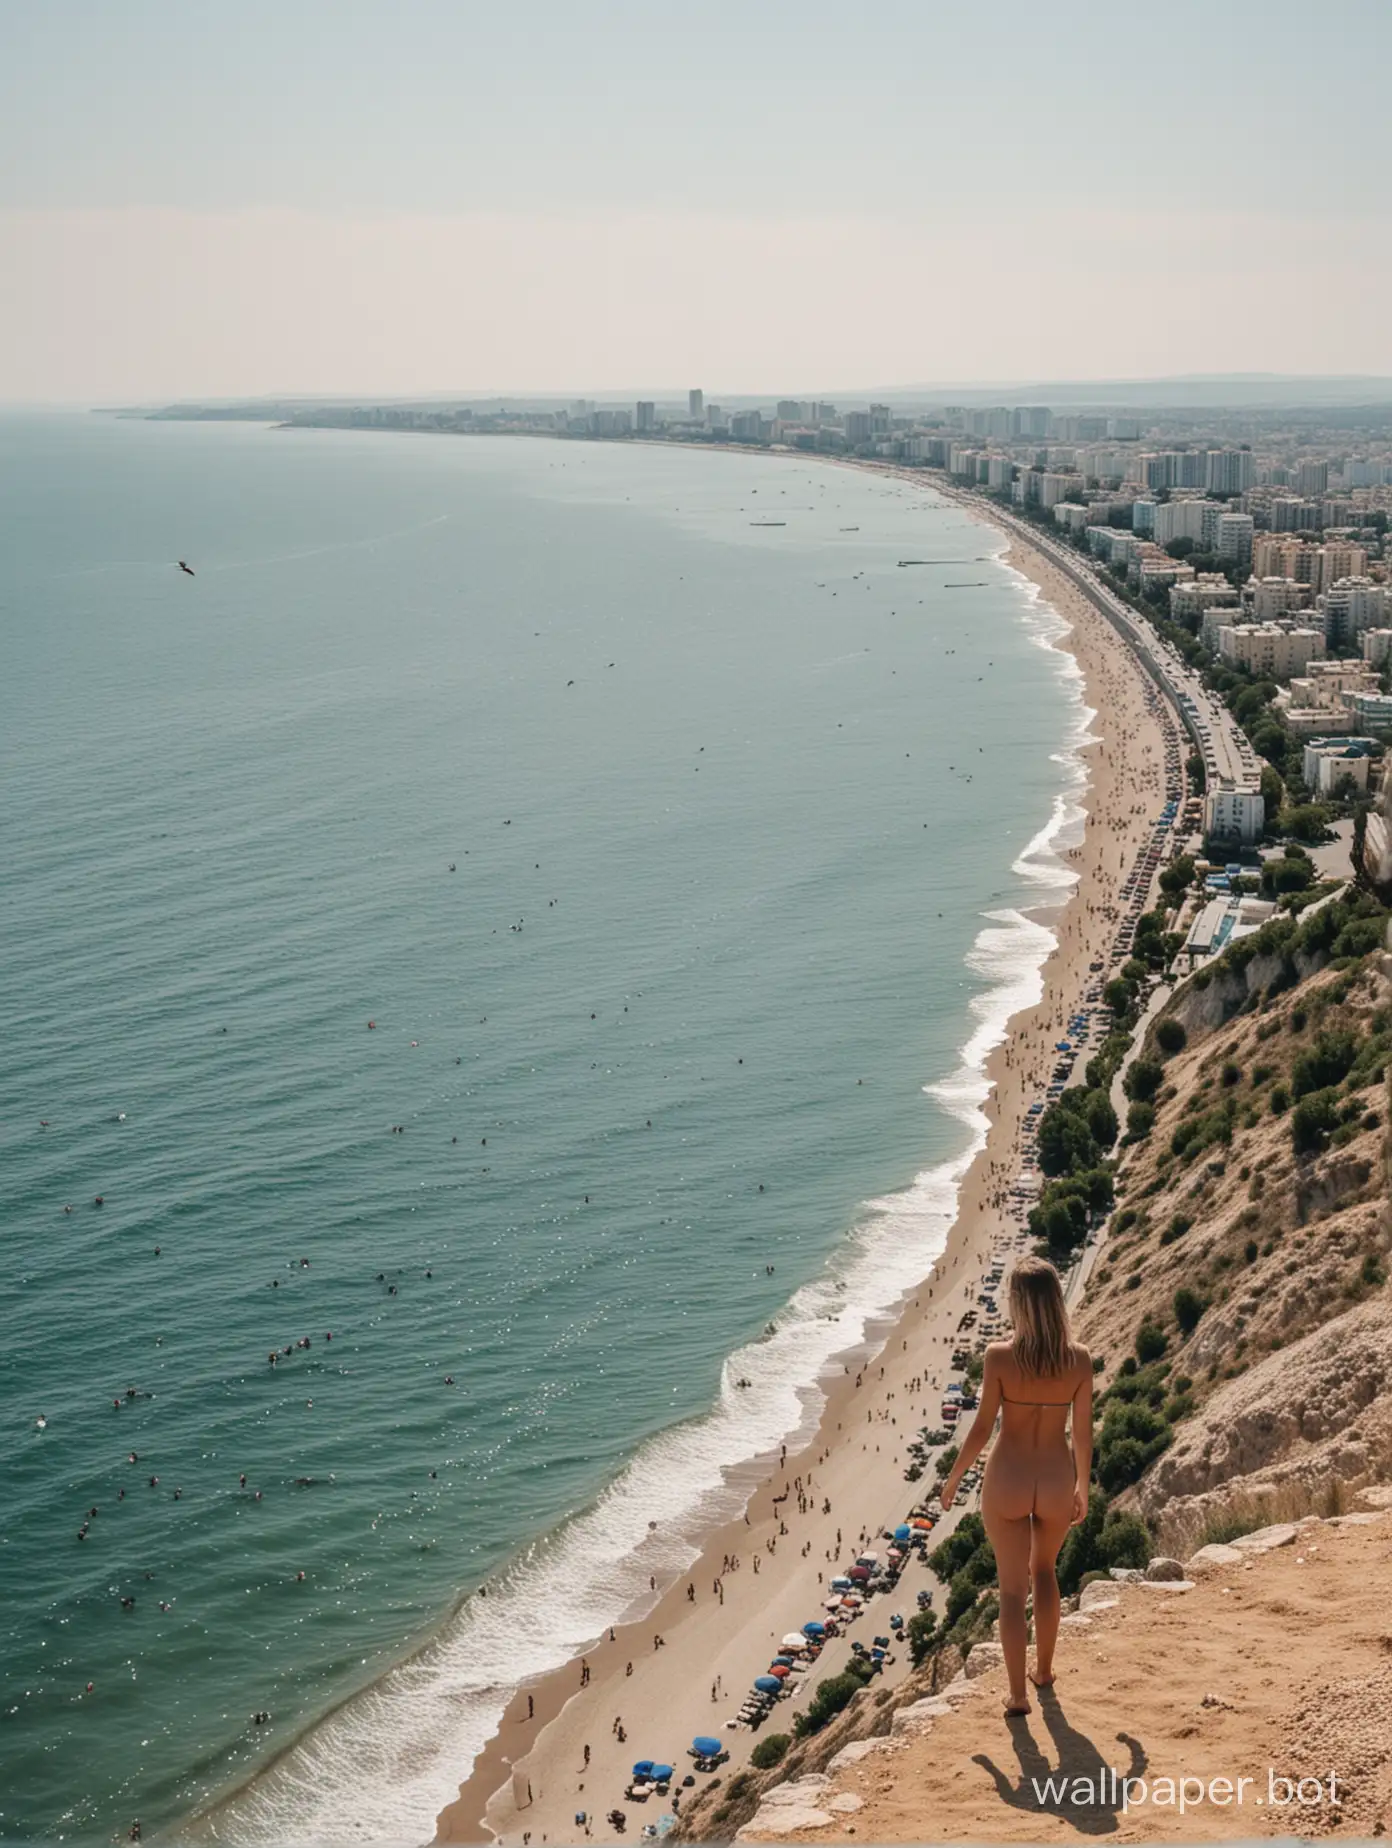 View of the city in the distance against the sea, Crimea, summer, people, birds, nudist beach in the distance